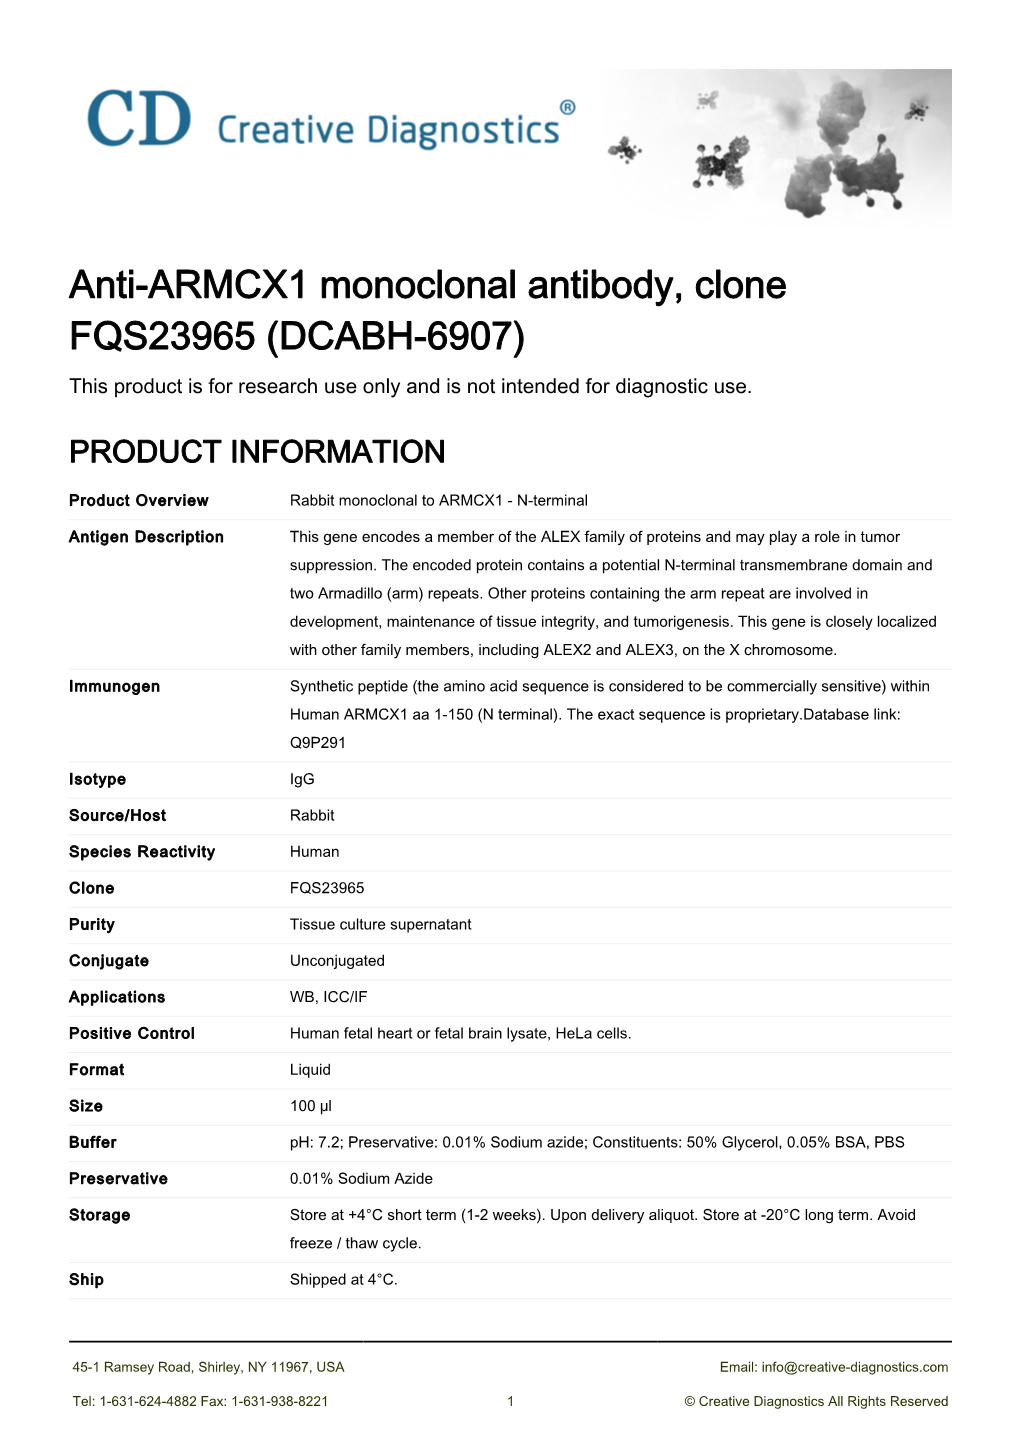 Anti-ARMCX1 Monoclonal Antibody, Clone FQS23965 (DCABH-6907) This Product Is for Research Use Only and Is Not Intended for Diagnostic Use